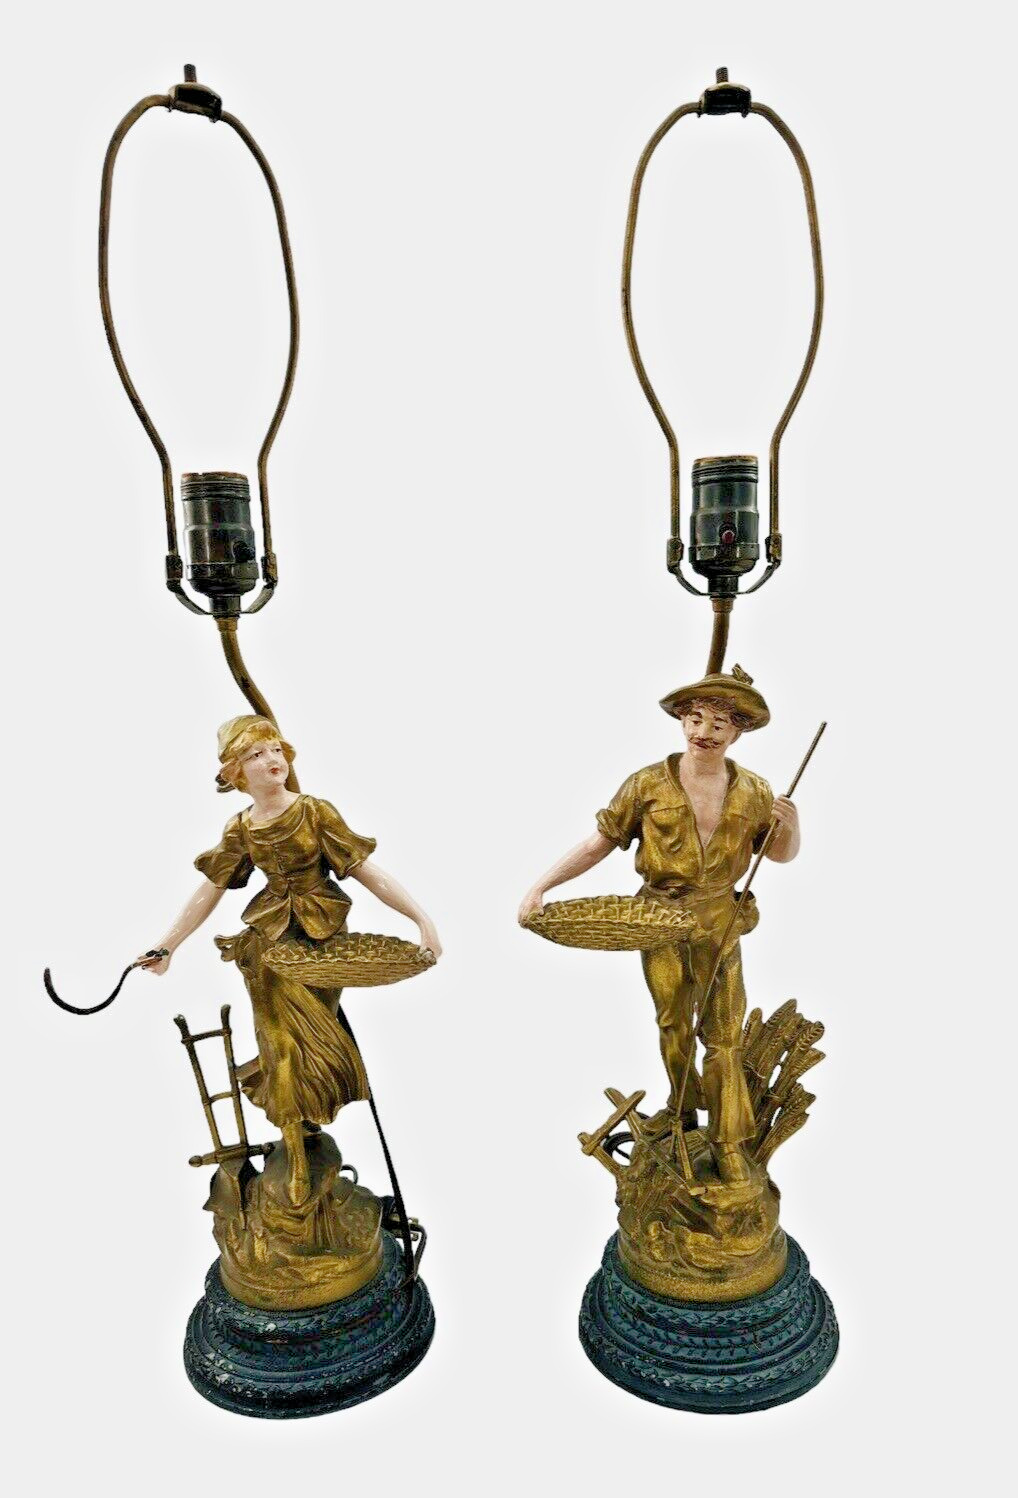 Antique Pair of FARMER LAMPS Man and Wife Wheat Farming Polychrome Painted Metal